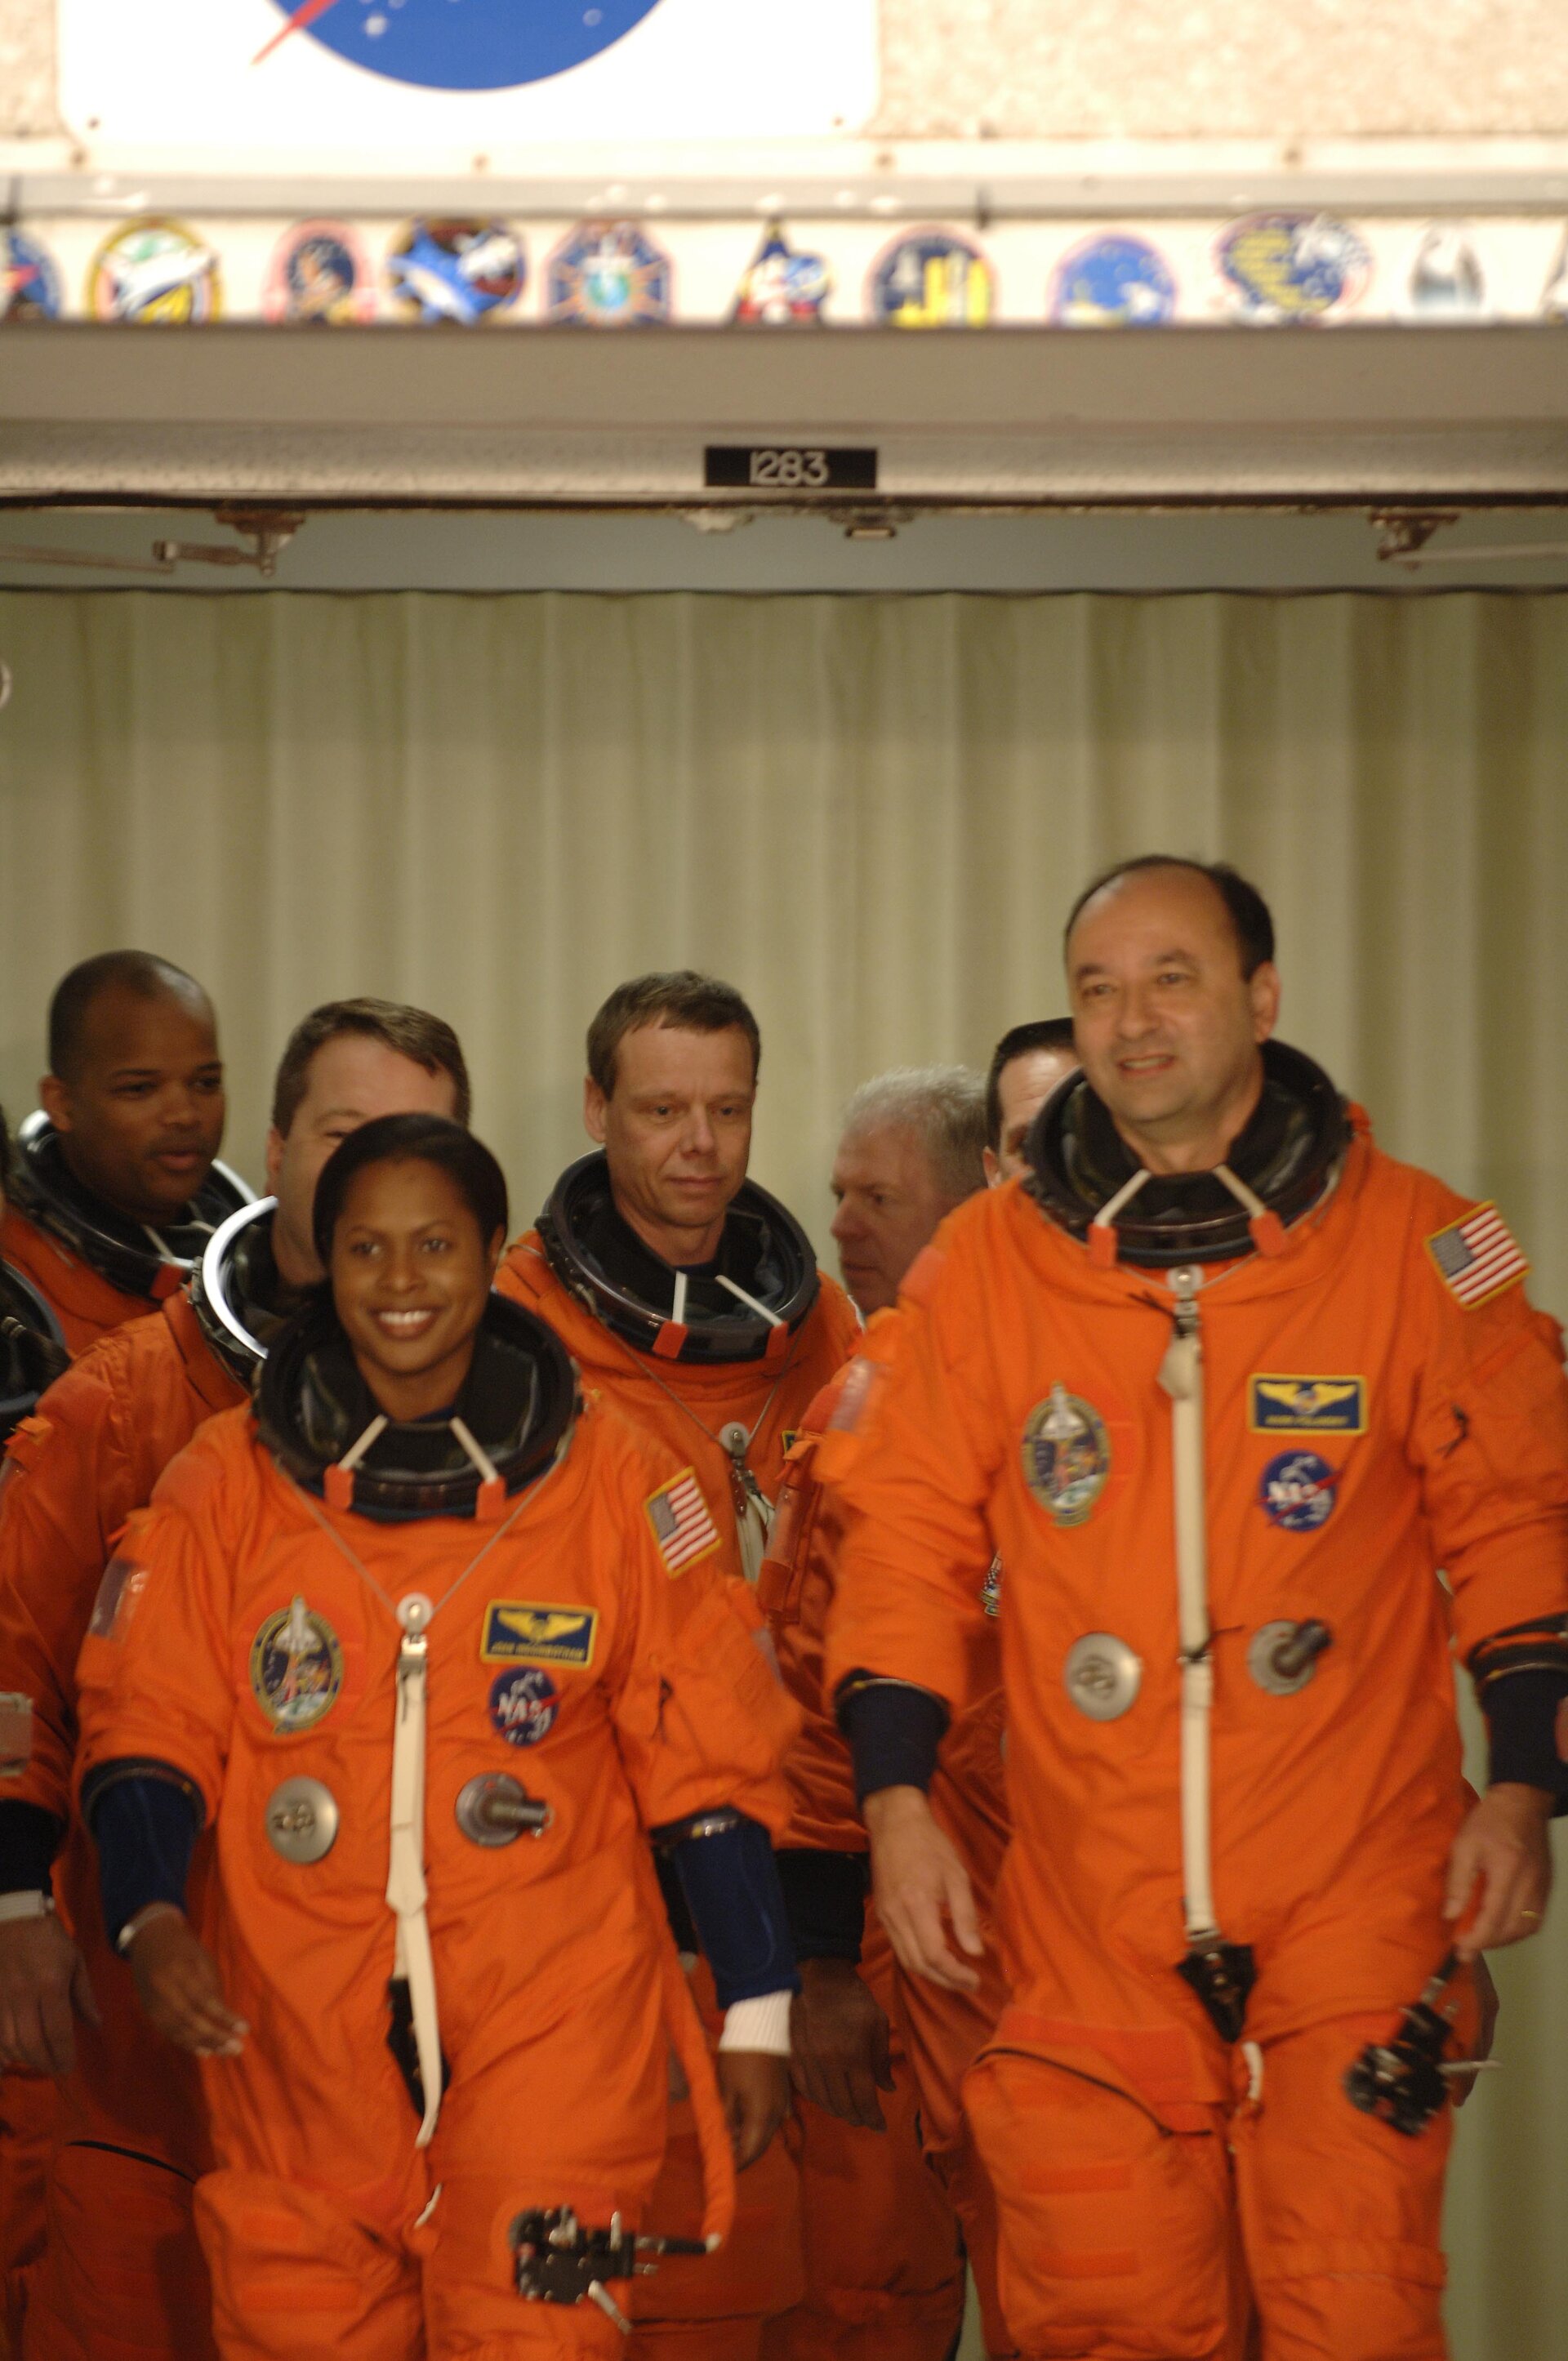 STS-116 Shuttle crew, wearing their orange Advanced Crew Escape Suits (ACES), walkout for the practice countdown at KSC